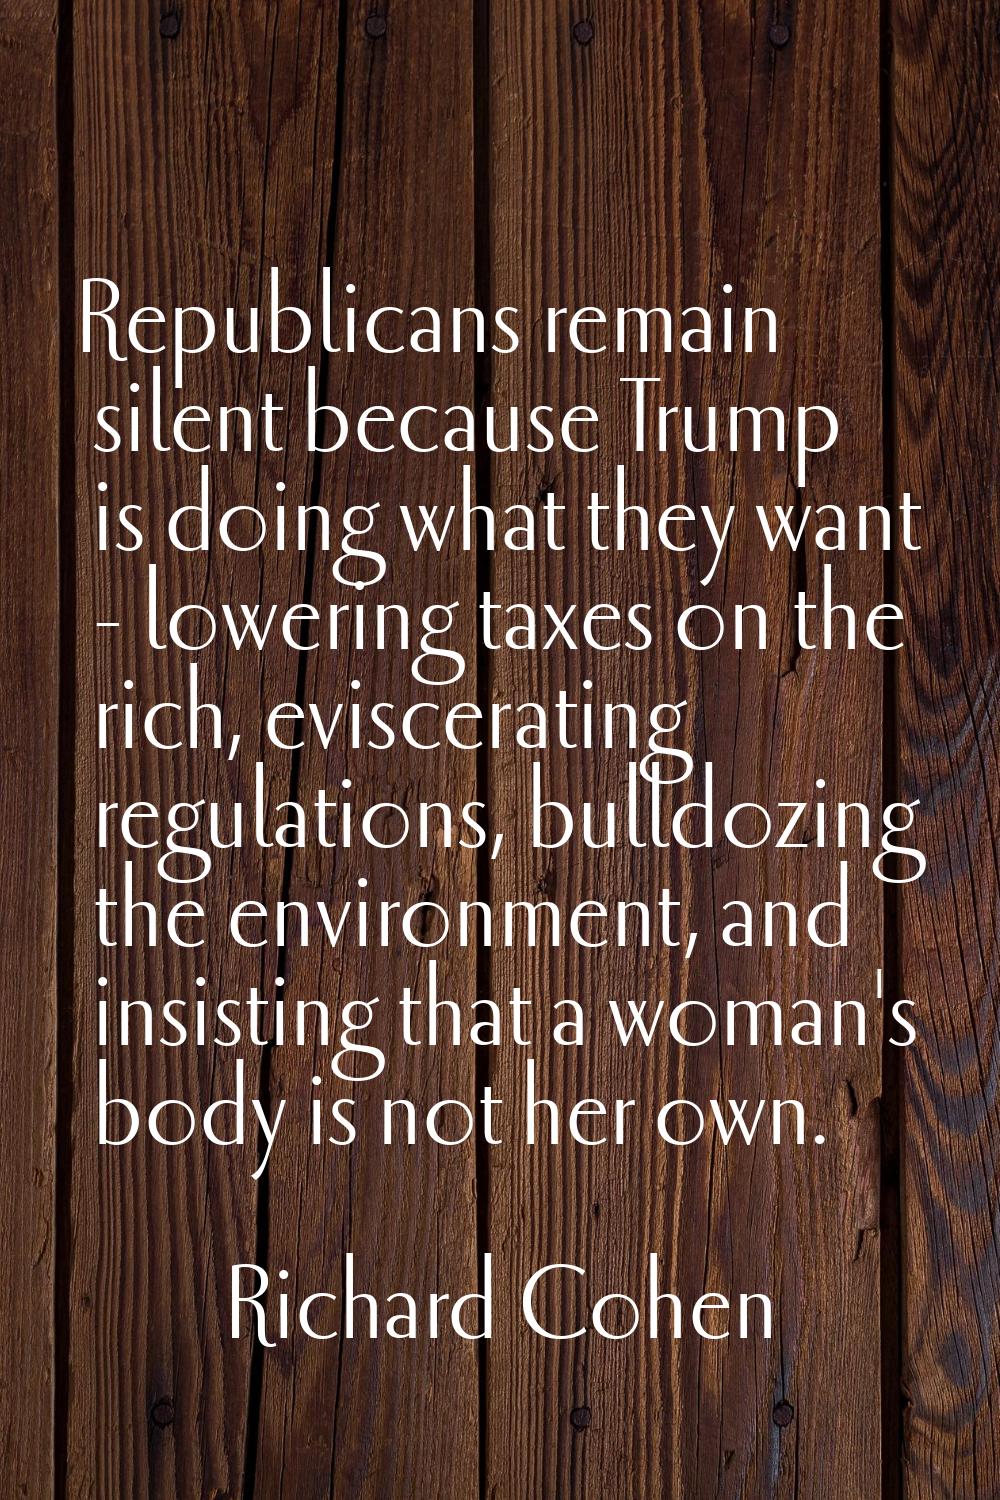 Republicans remain silent because Trump is doing what they want - lowering taxes on the rich, evisc